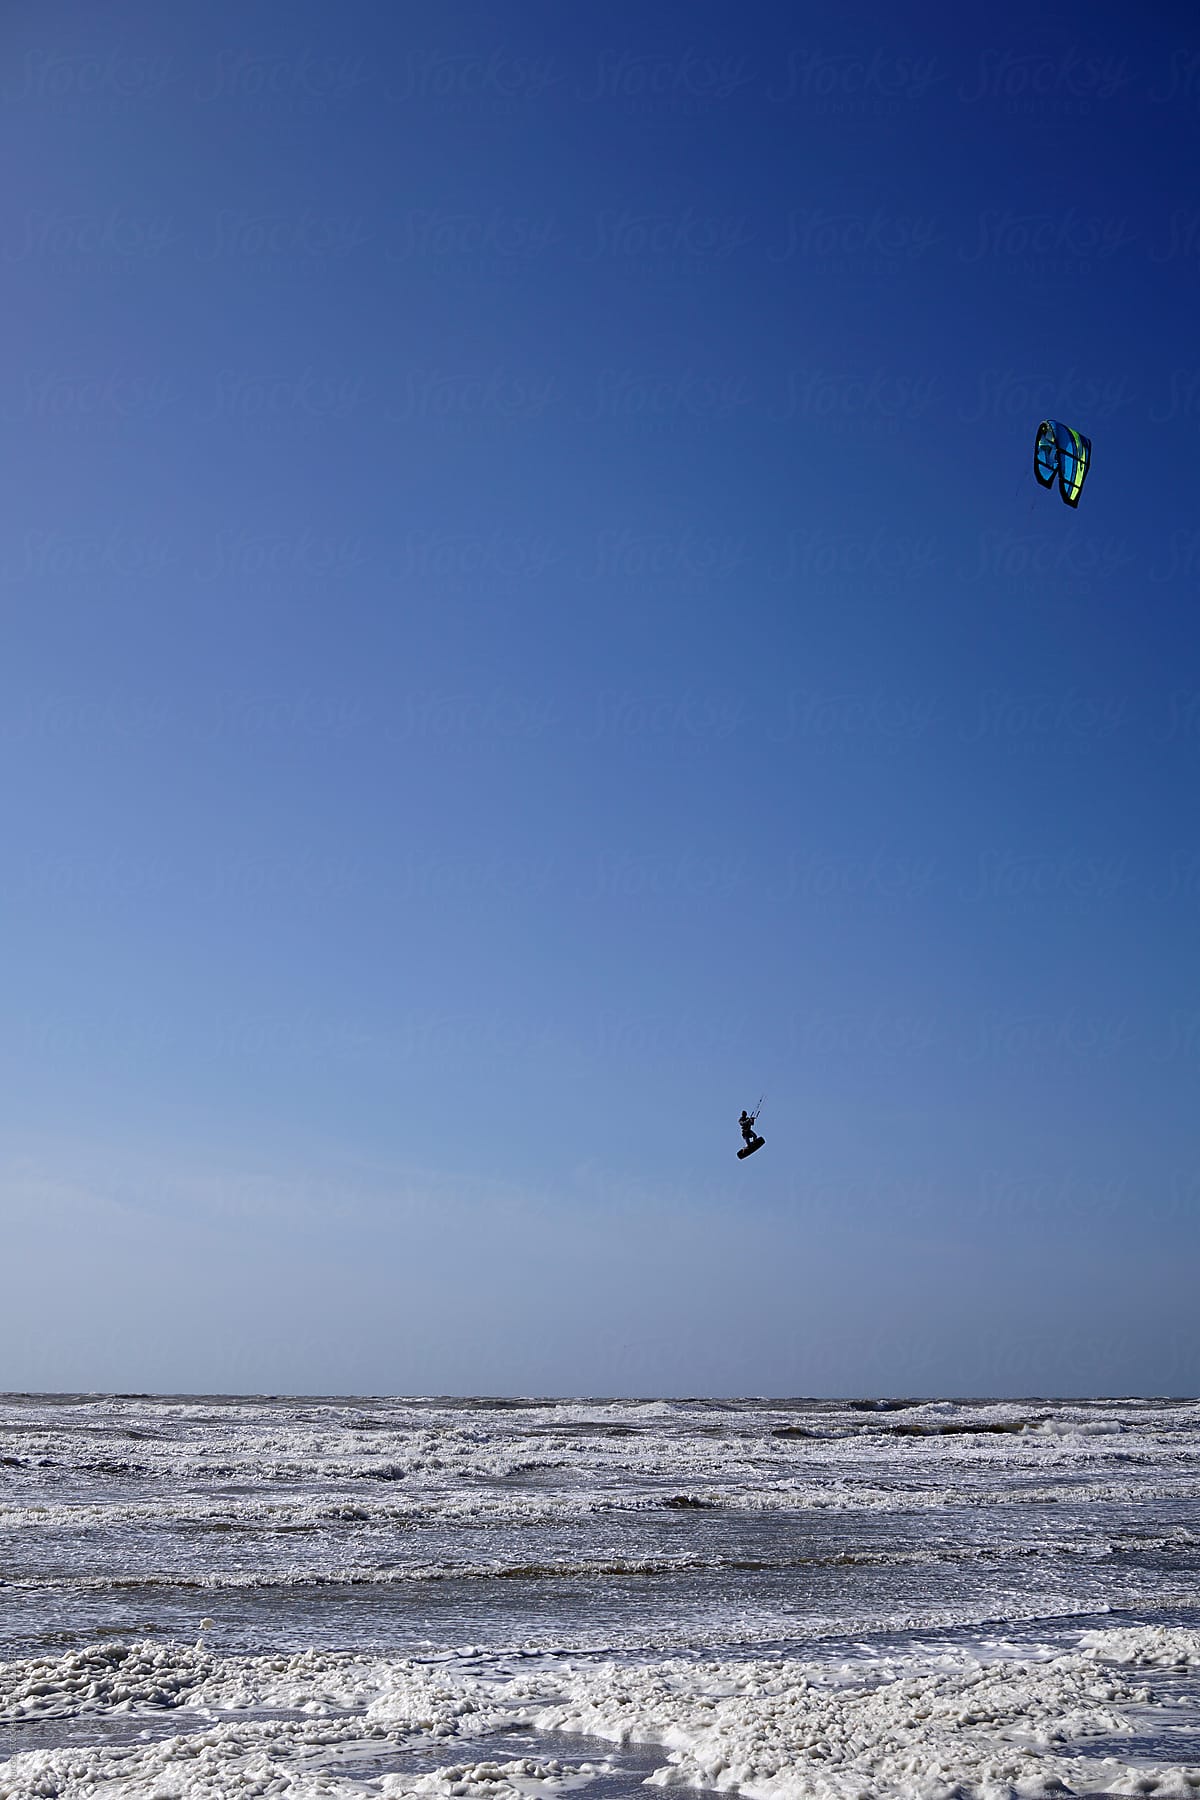 Kite surfer jumping extremely high